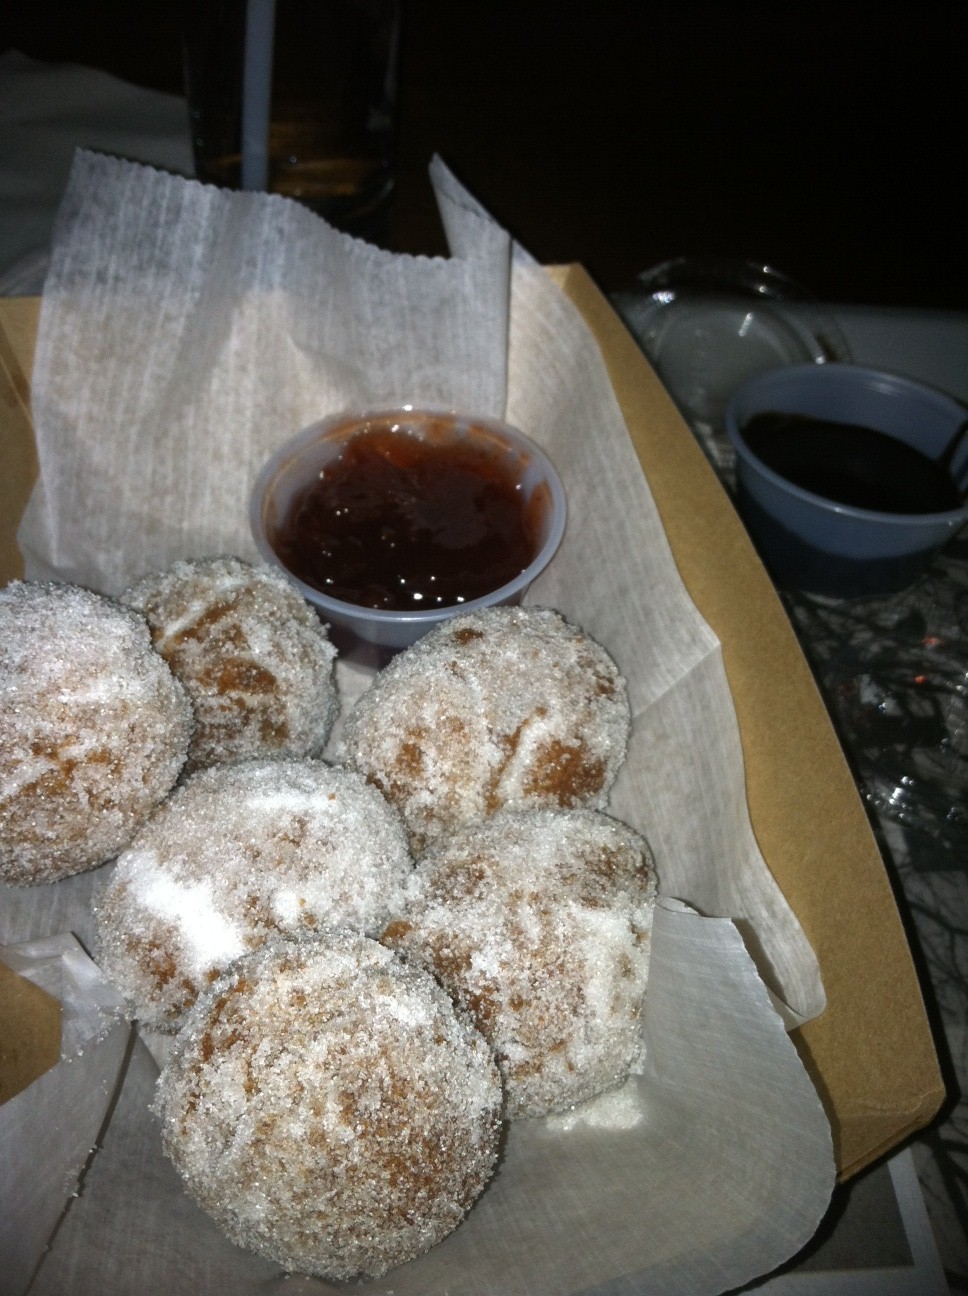 Pop Pub…Not For Burgers But the Fried Sugar Donuts.